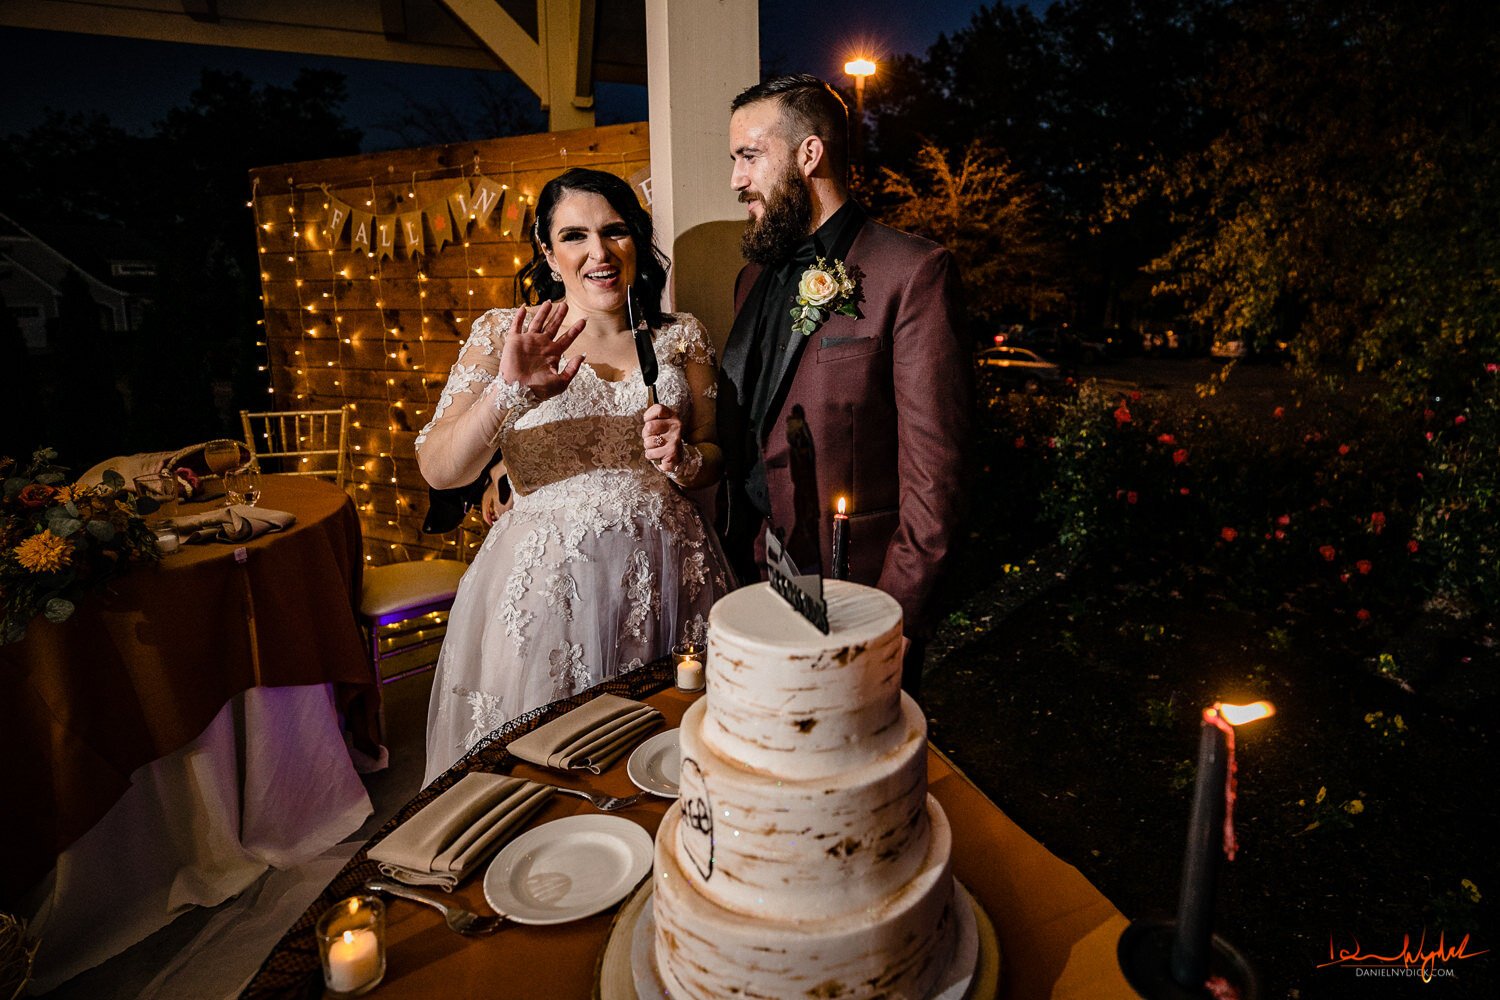 nj pinup goth bride and groom laughing at cake cutting at hallow